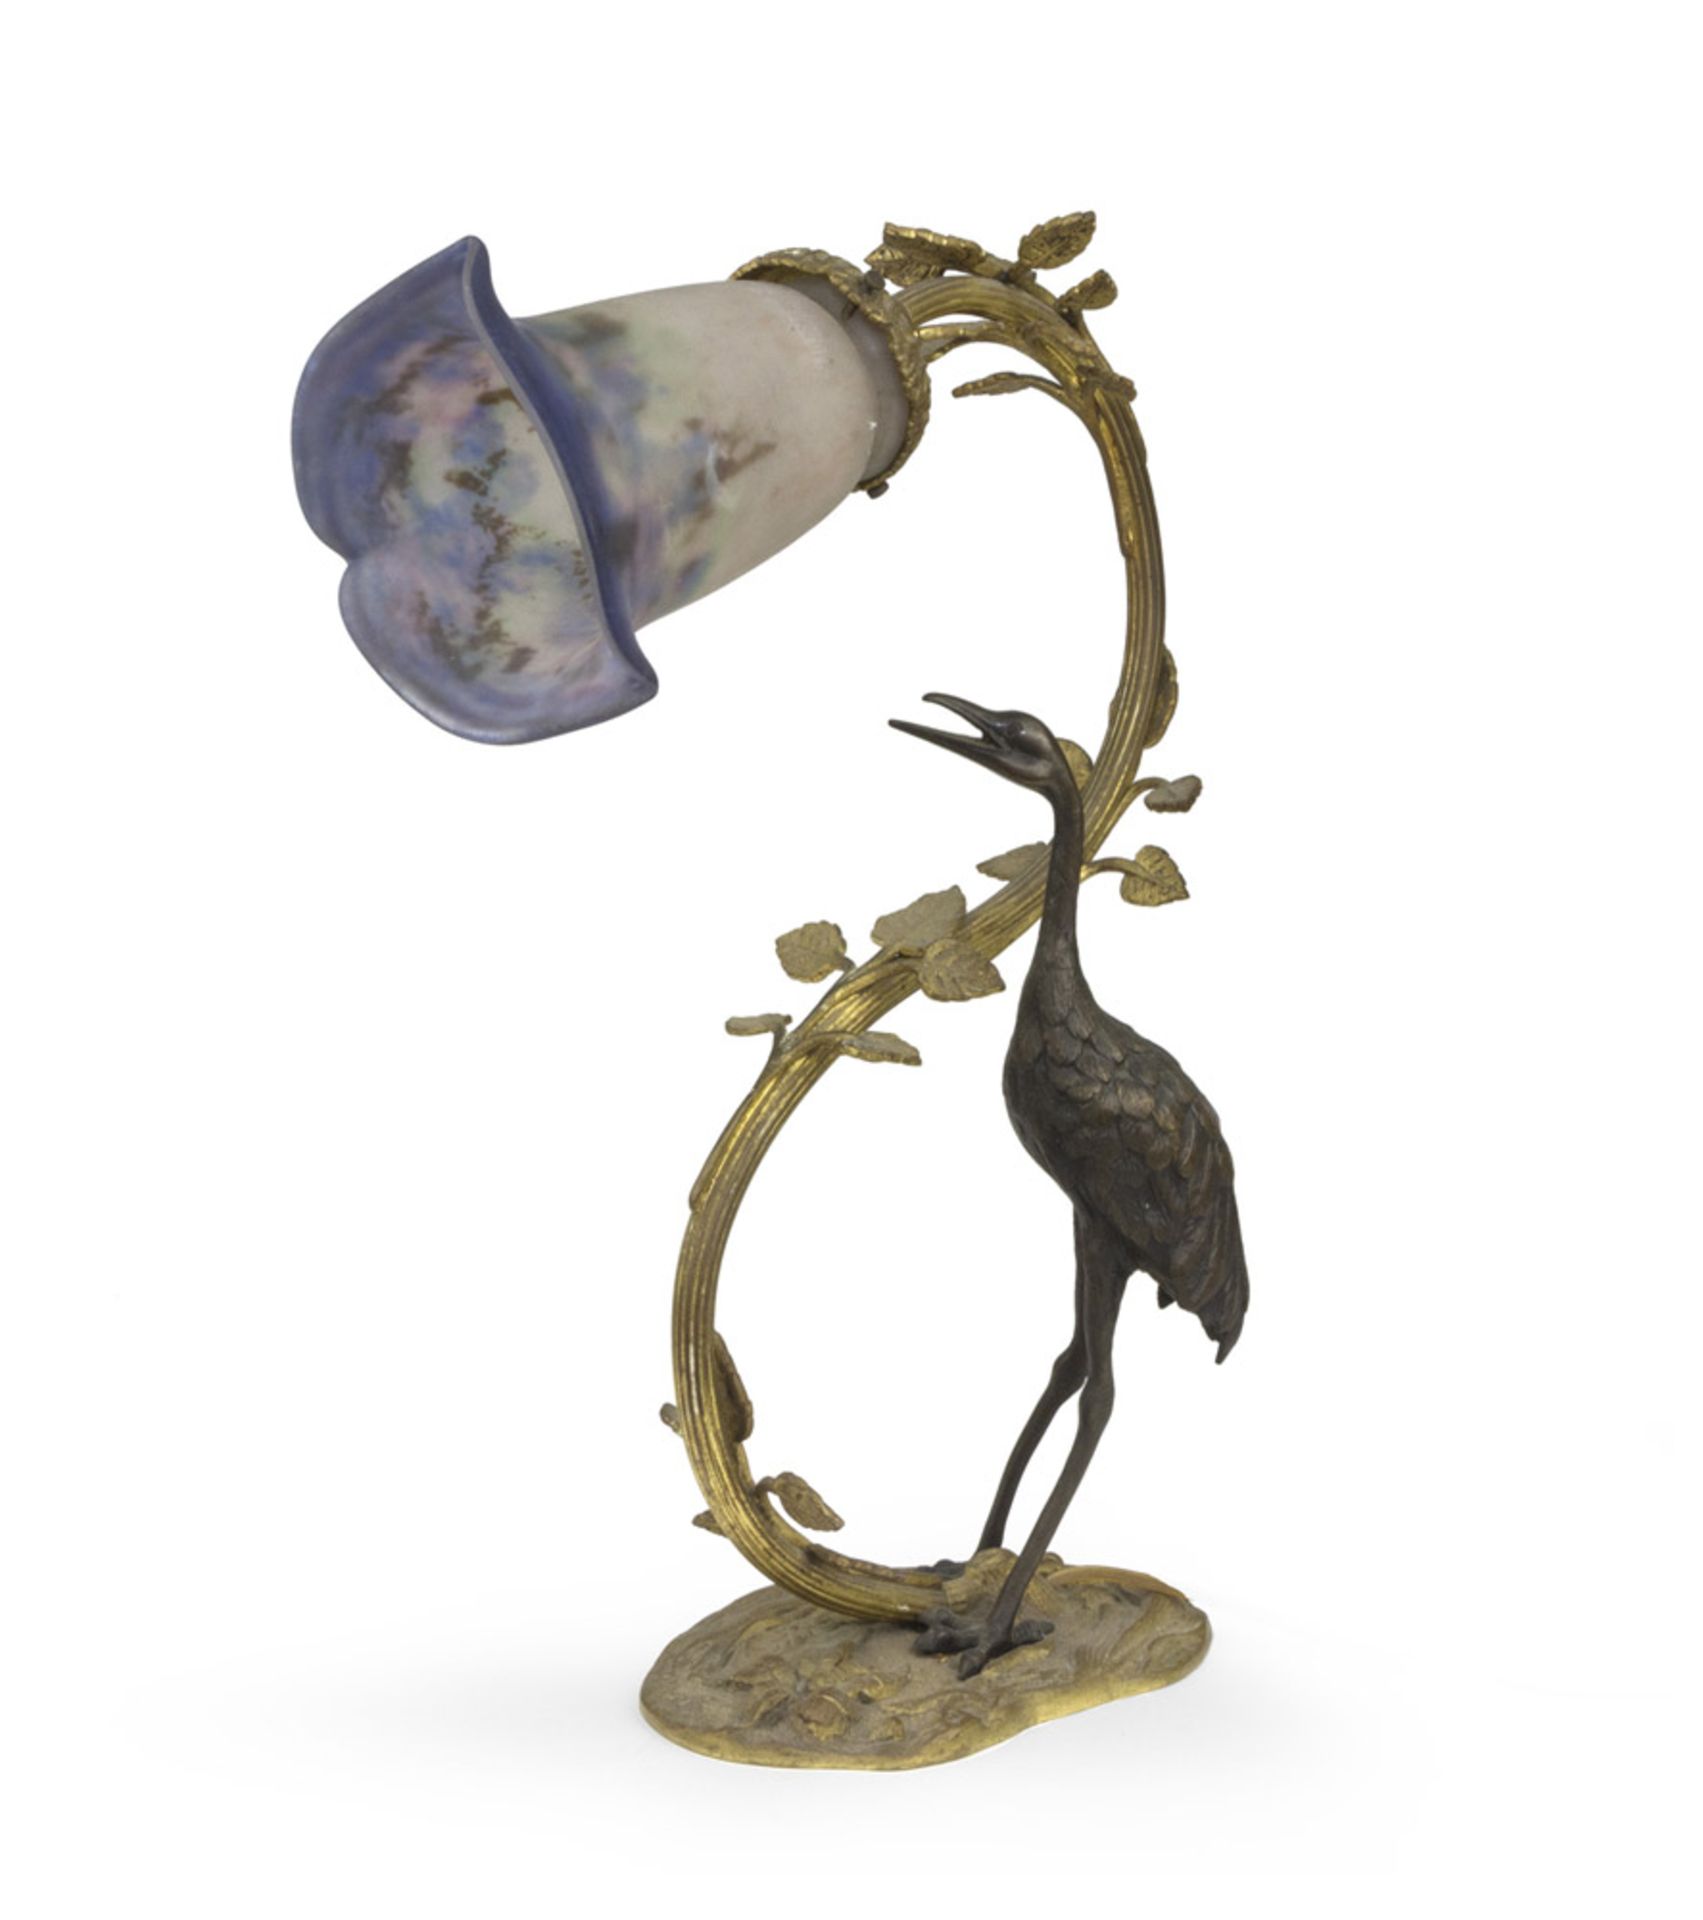 BRONZE TABLE LIGHT, EARLY 20TH CENTURY stem flanked by figure of phoenix. Measures cm. 43 x 15 x 30.